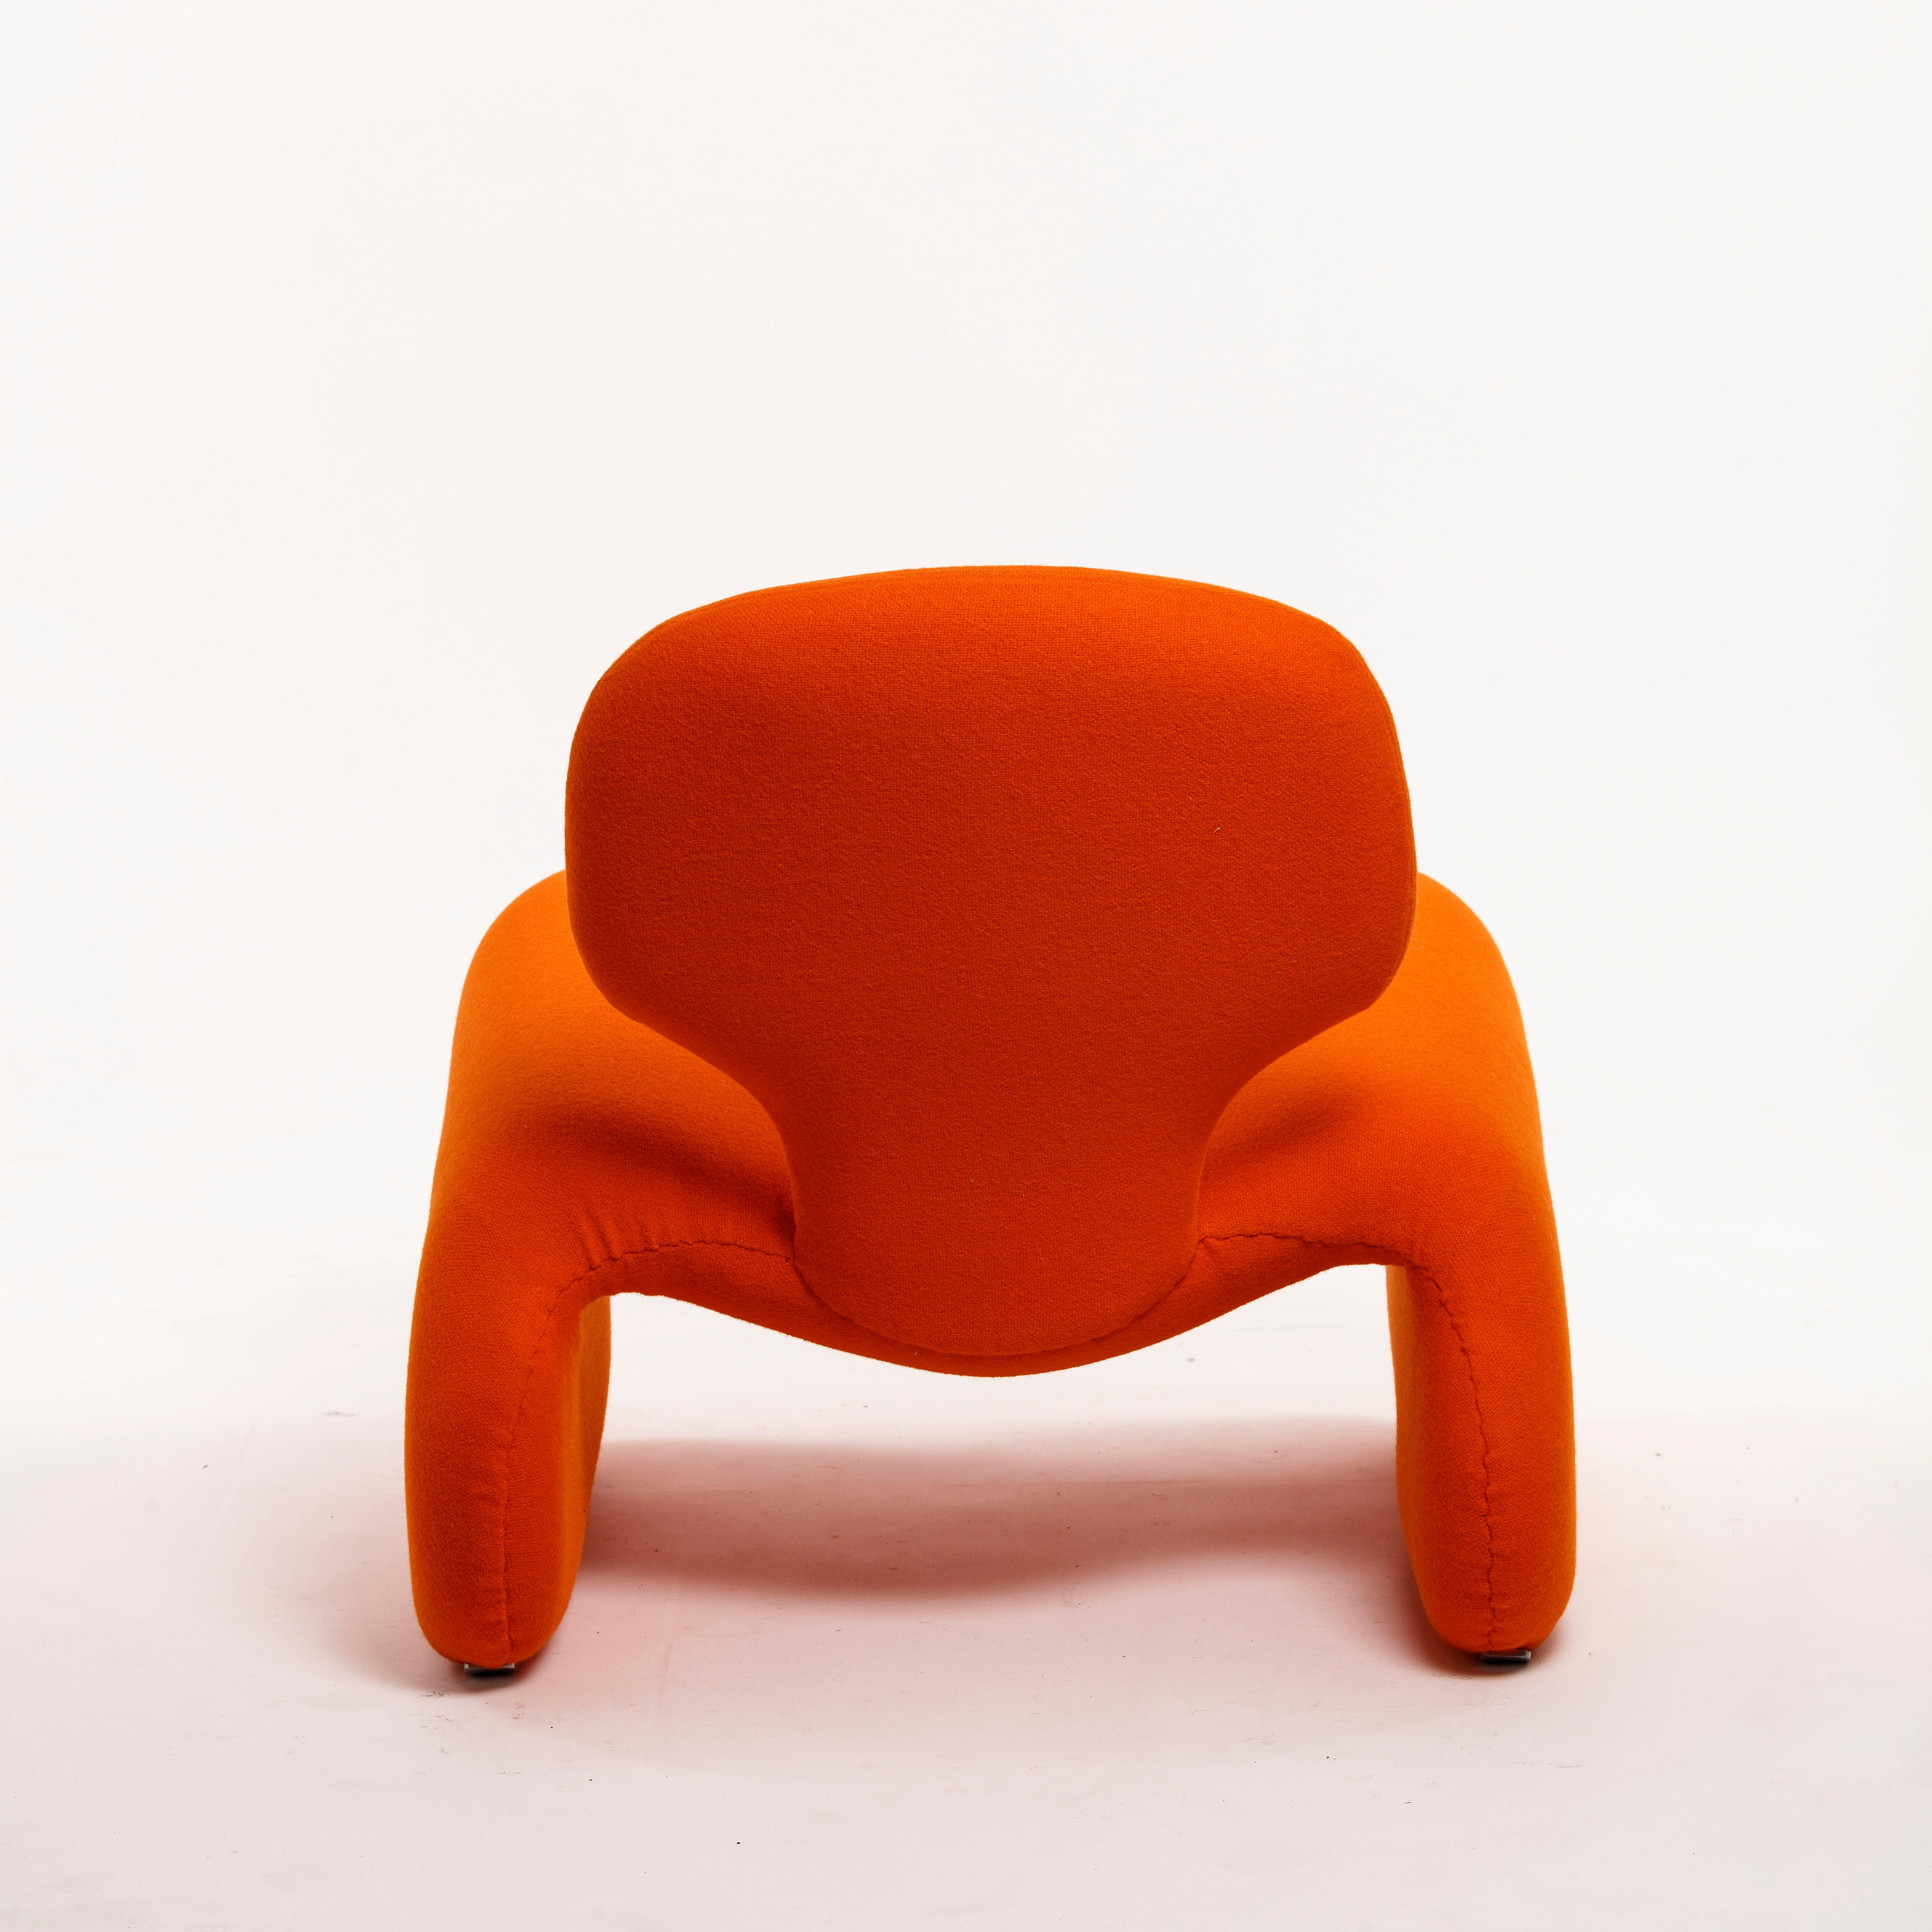 Mid-Century Modern Olivier Mourgue Iconic Djinn Chair Airborne 1963 Reupholstered in Orange Kvadrat For Sale